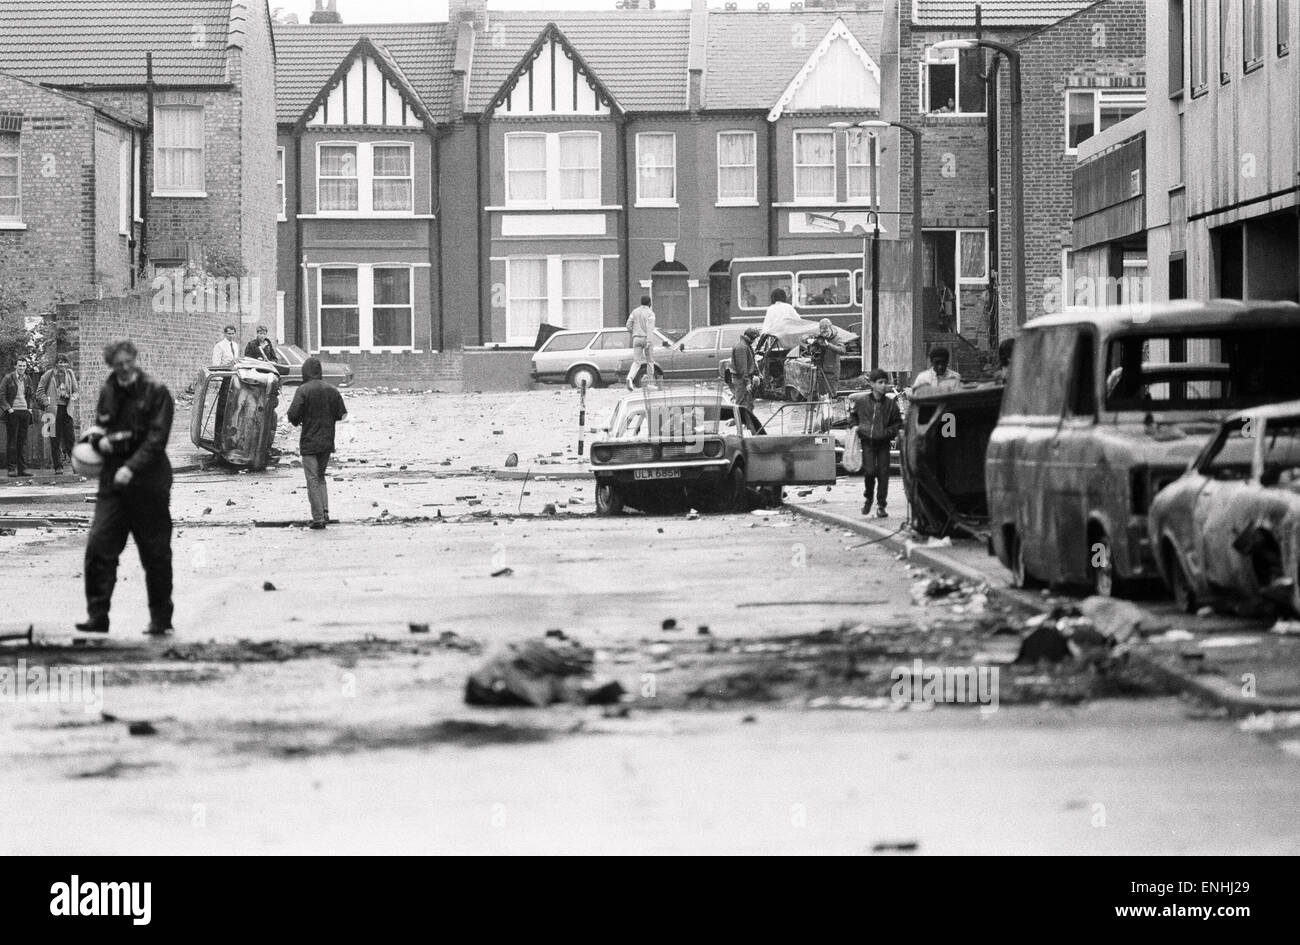 Aftermath of the riots which broke out in the Broadwater Farm estate in Tottenham, North London. The riot started the day after local resident Cynthia Jarrett died during a disturbance while police searched her home. Picture shows a general street scene s Stock Photo